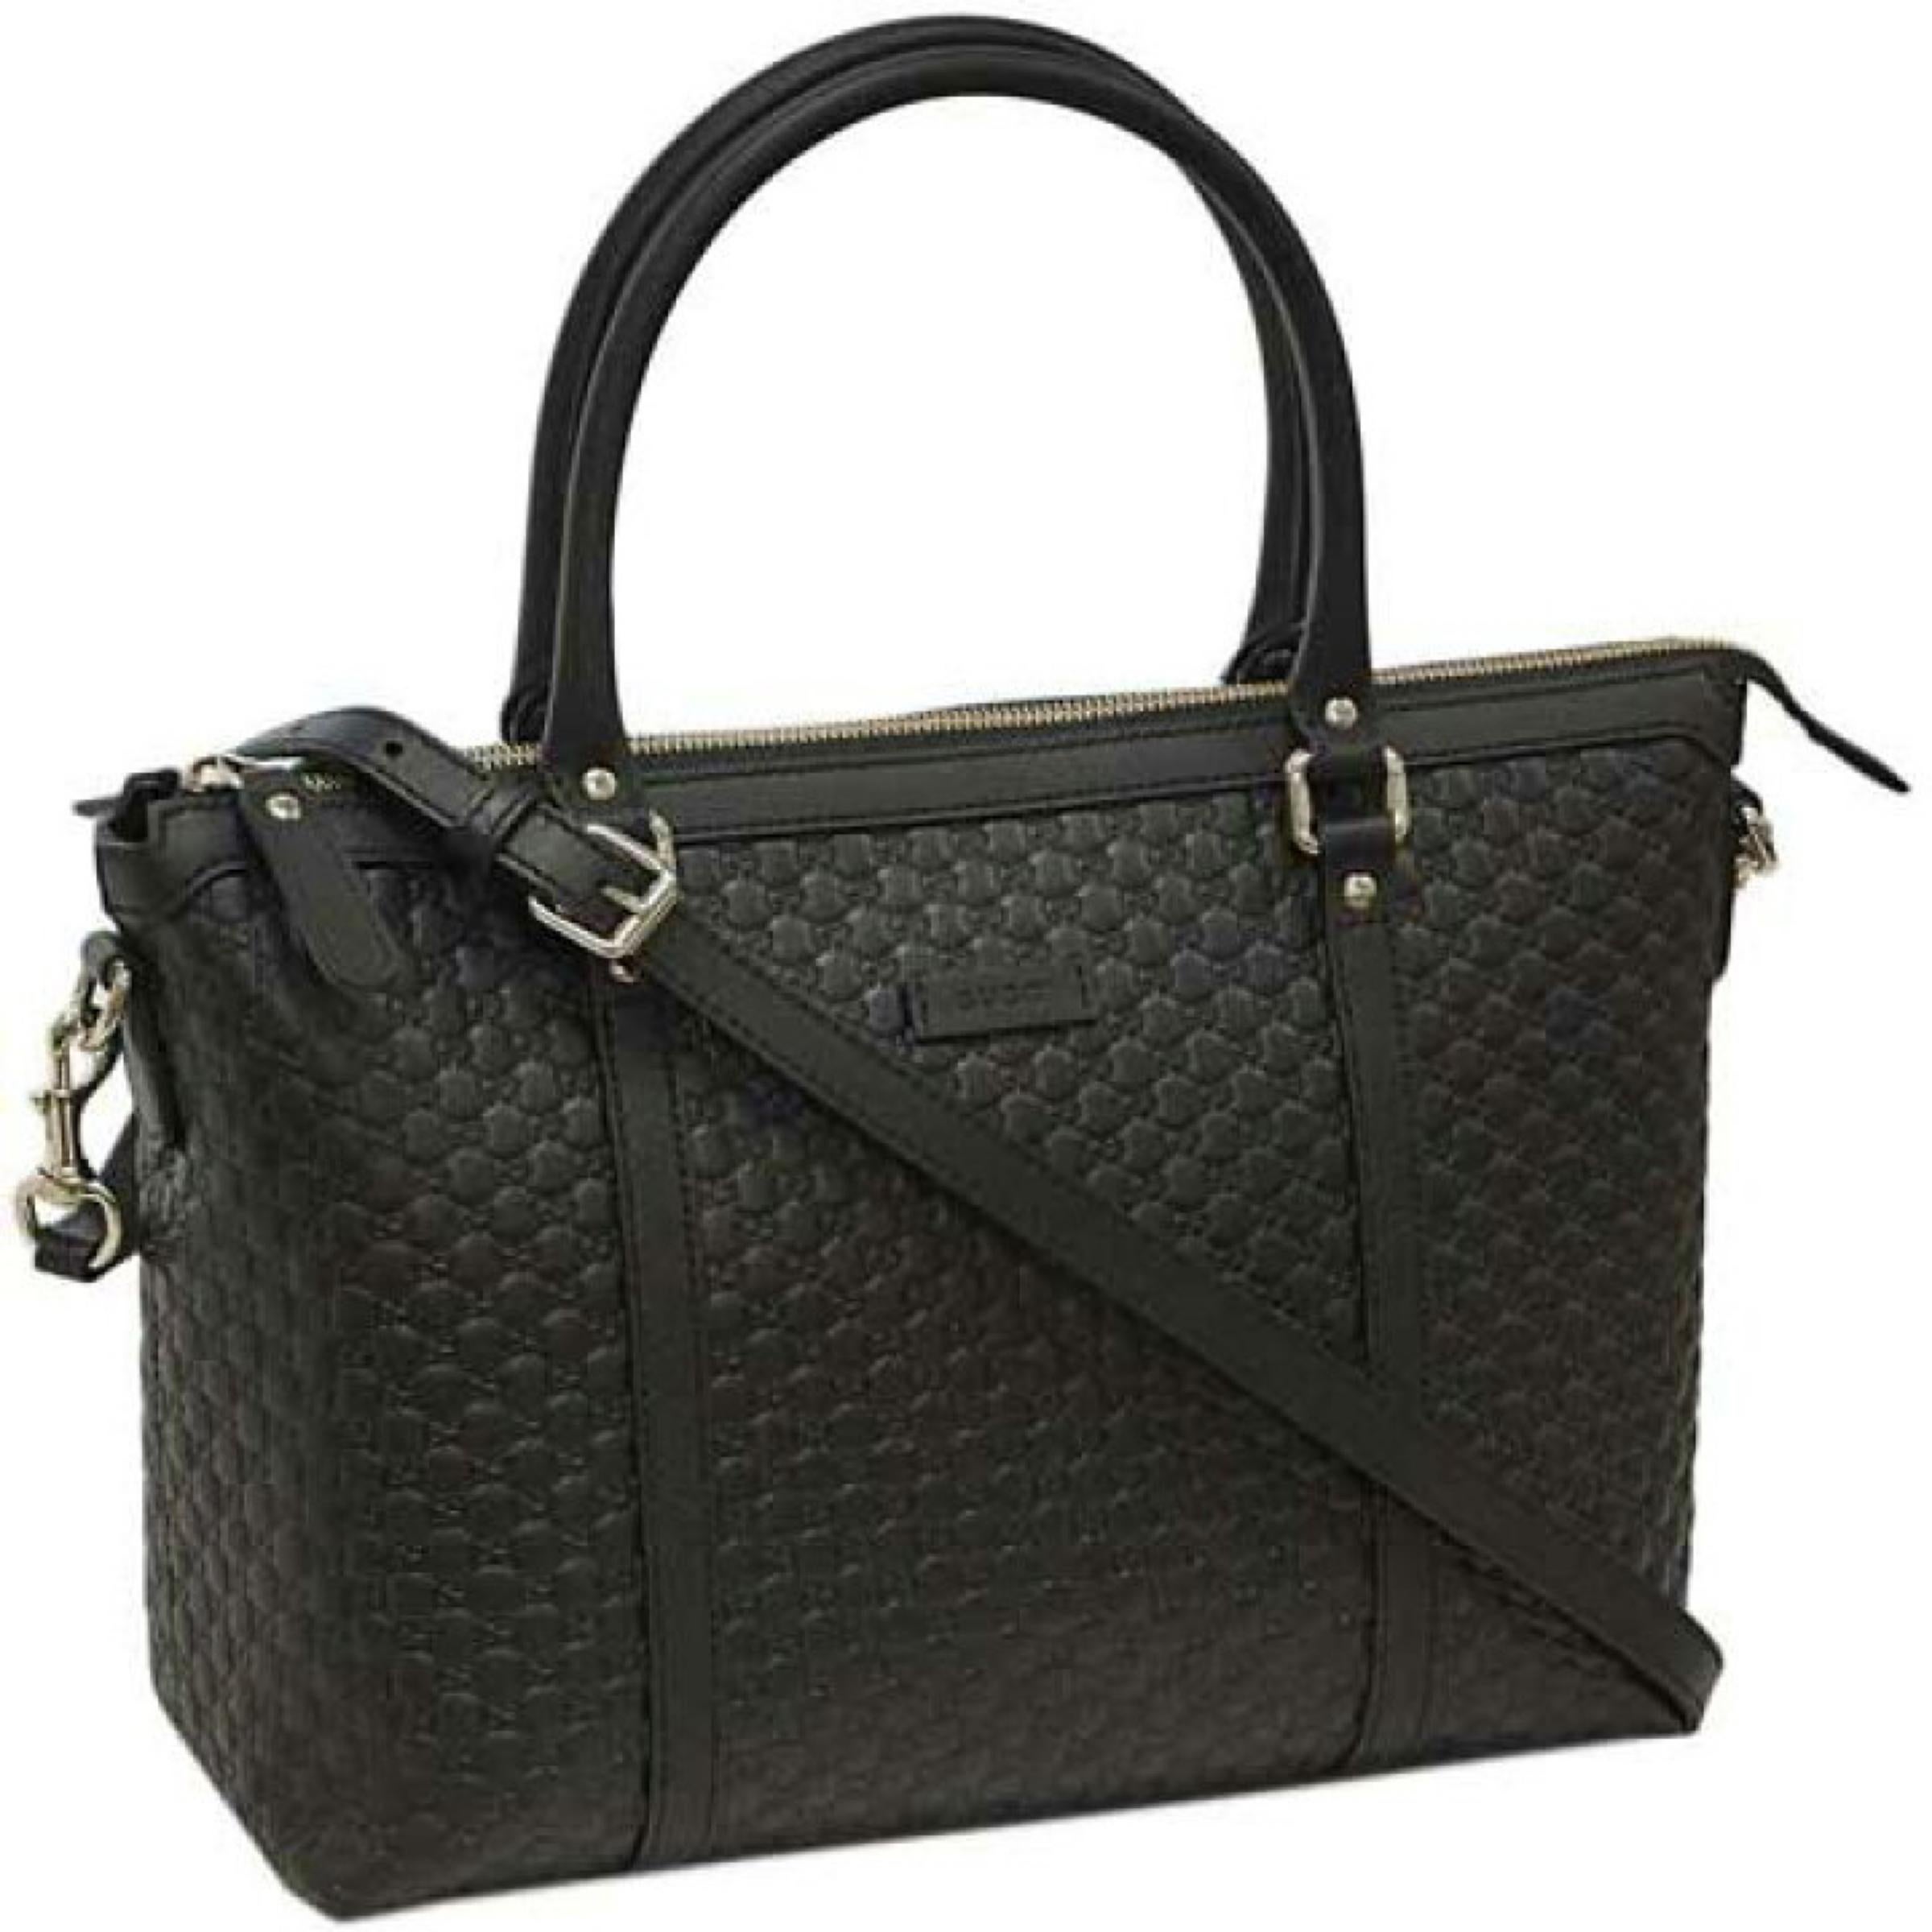 Women's New Gucci Black Leather GG Micro Guccissima Large Tote Crossbody Shoulder Bag For Sale